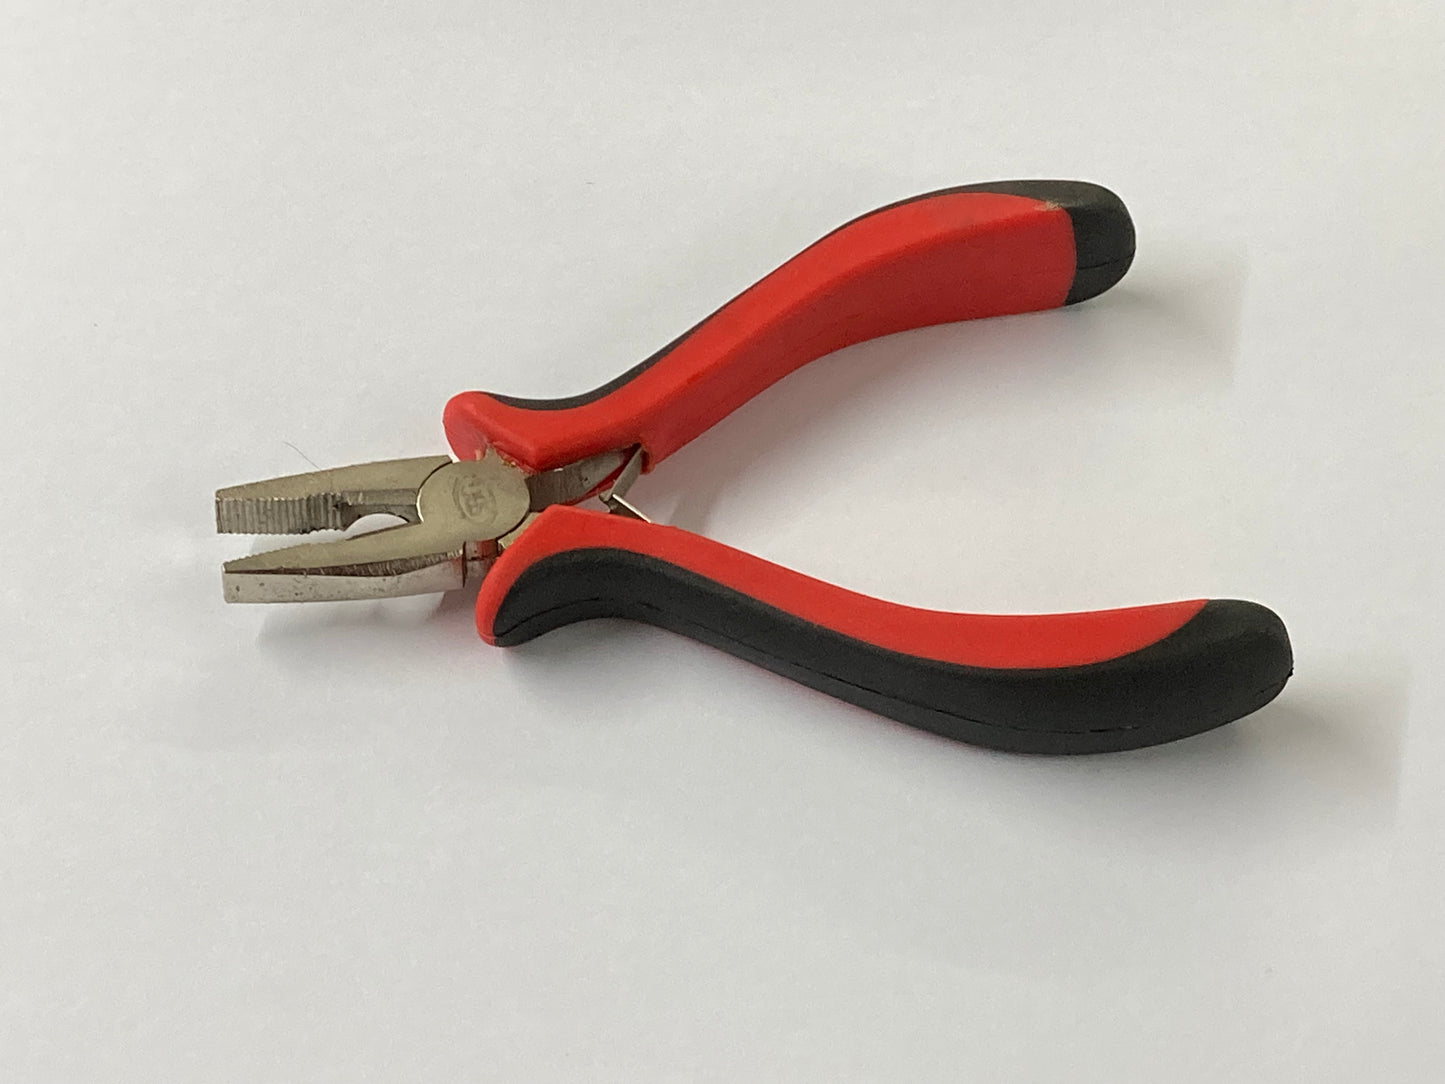 526 - Mounting Pliers